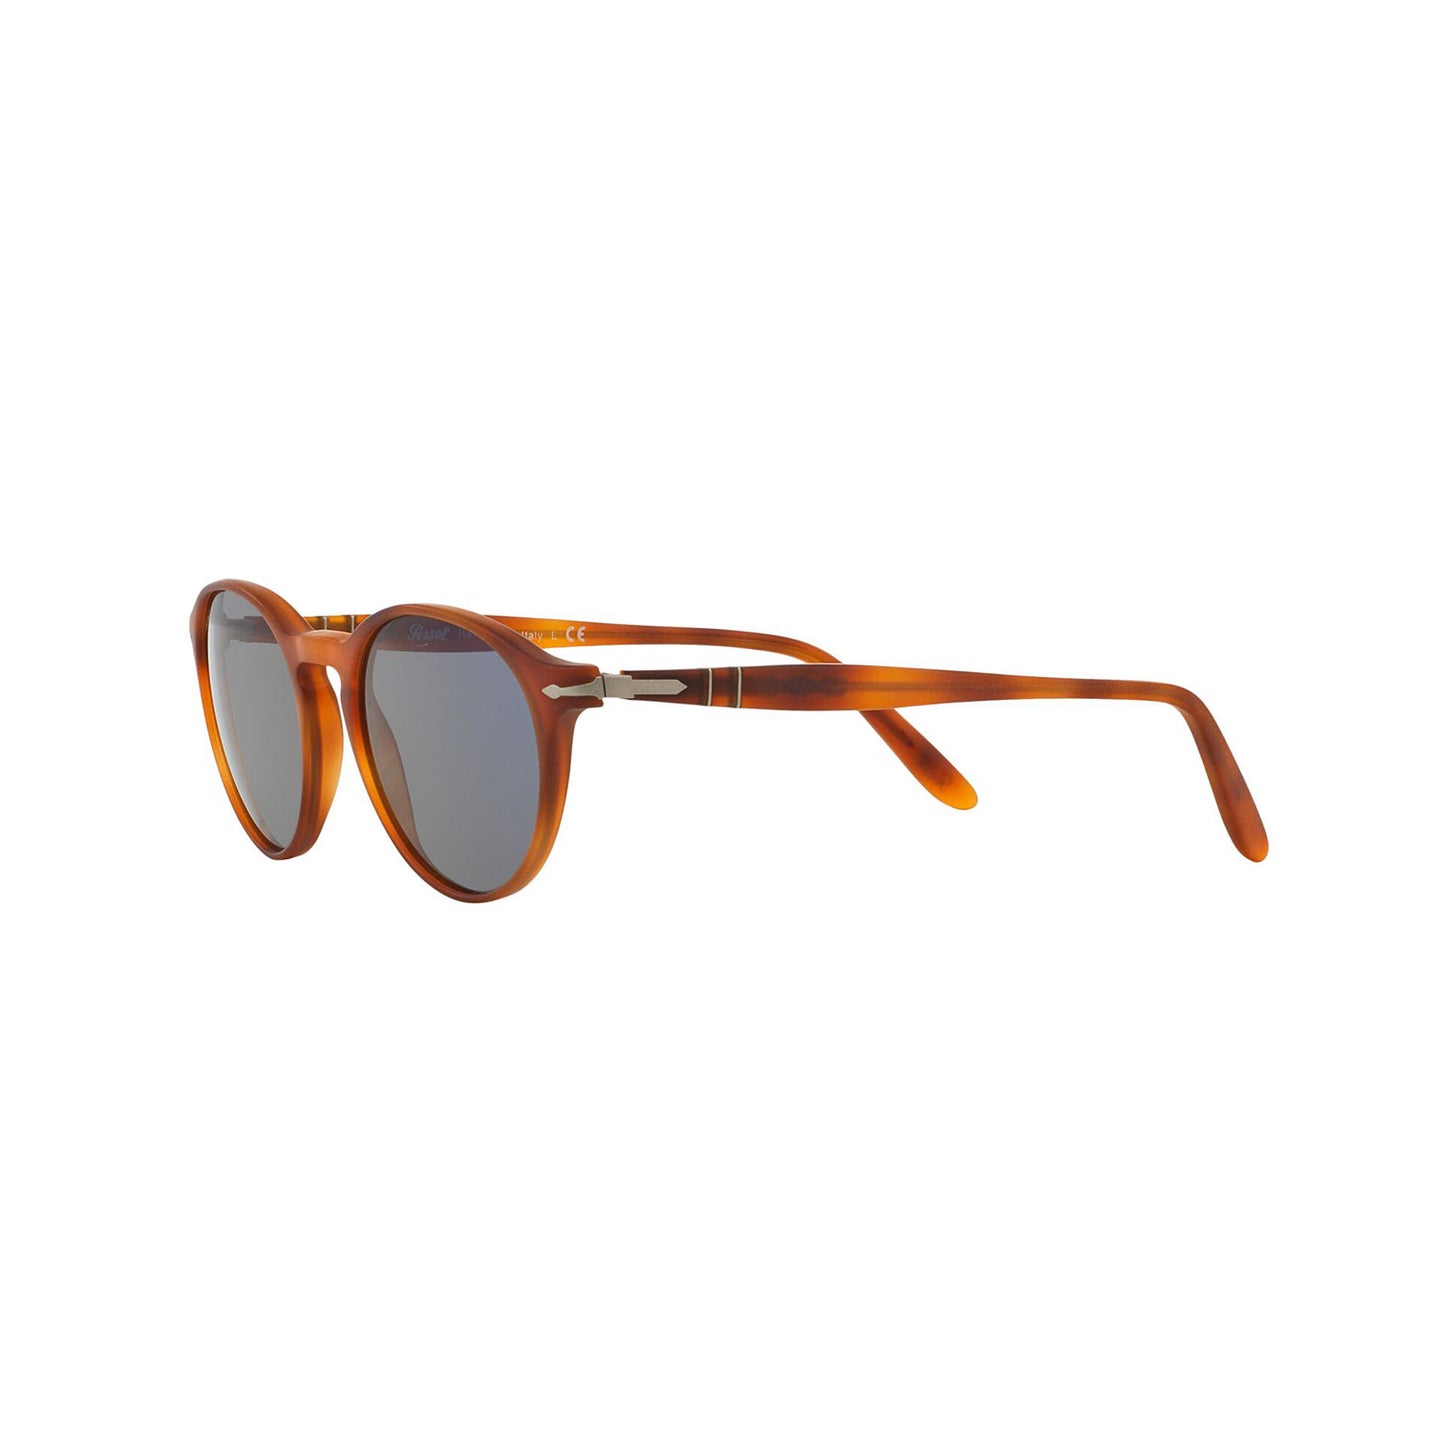 sunglasses persol 3092 9006/56 size 50 angled view